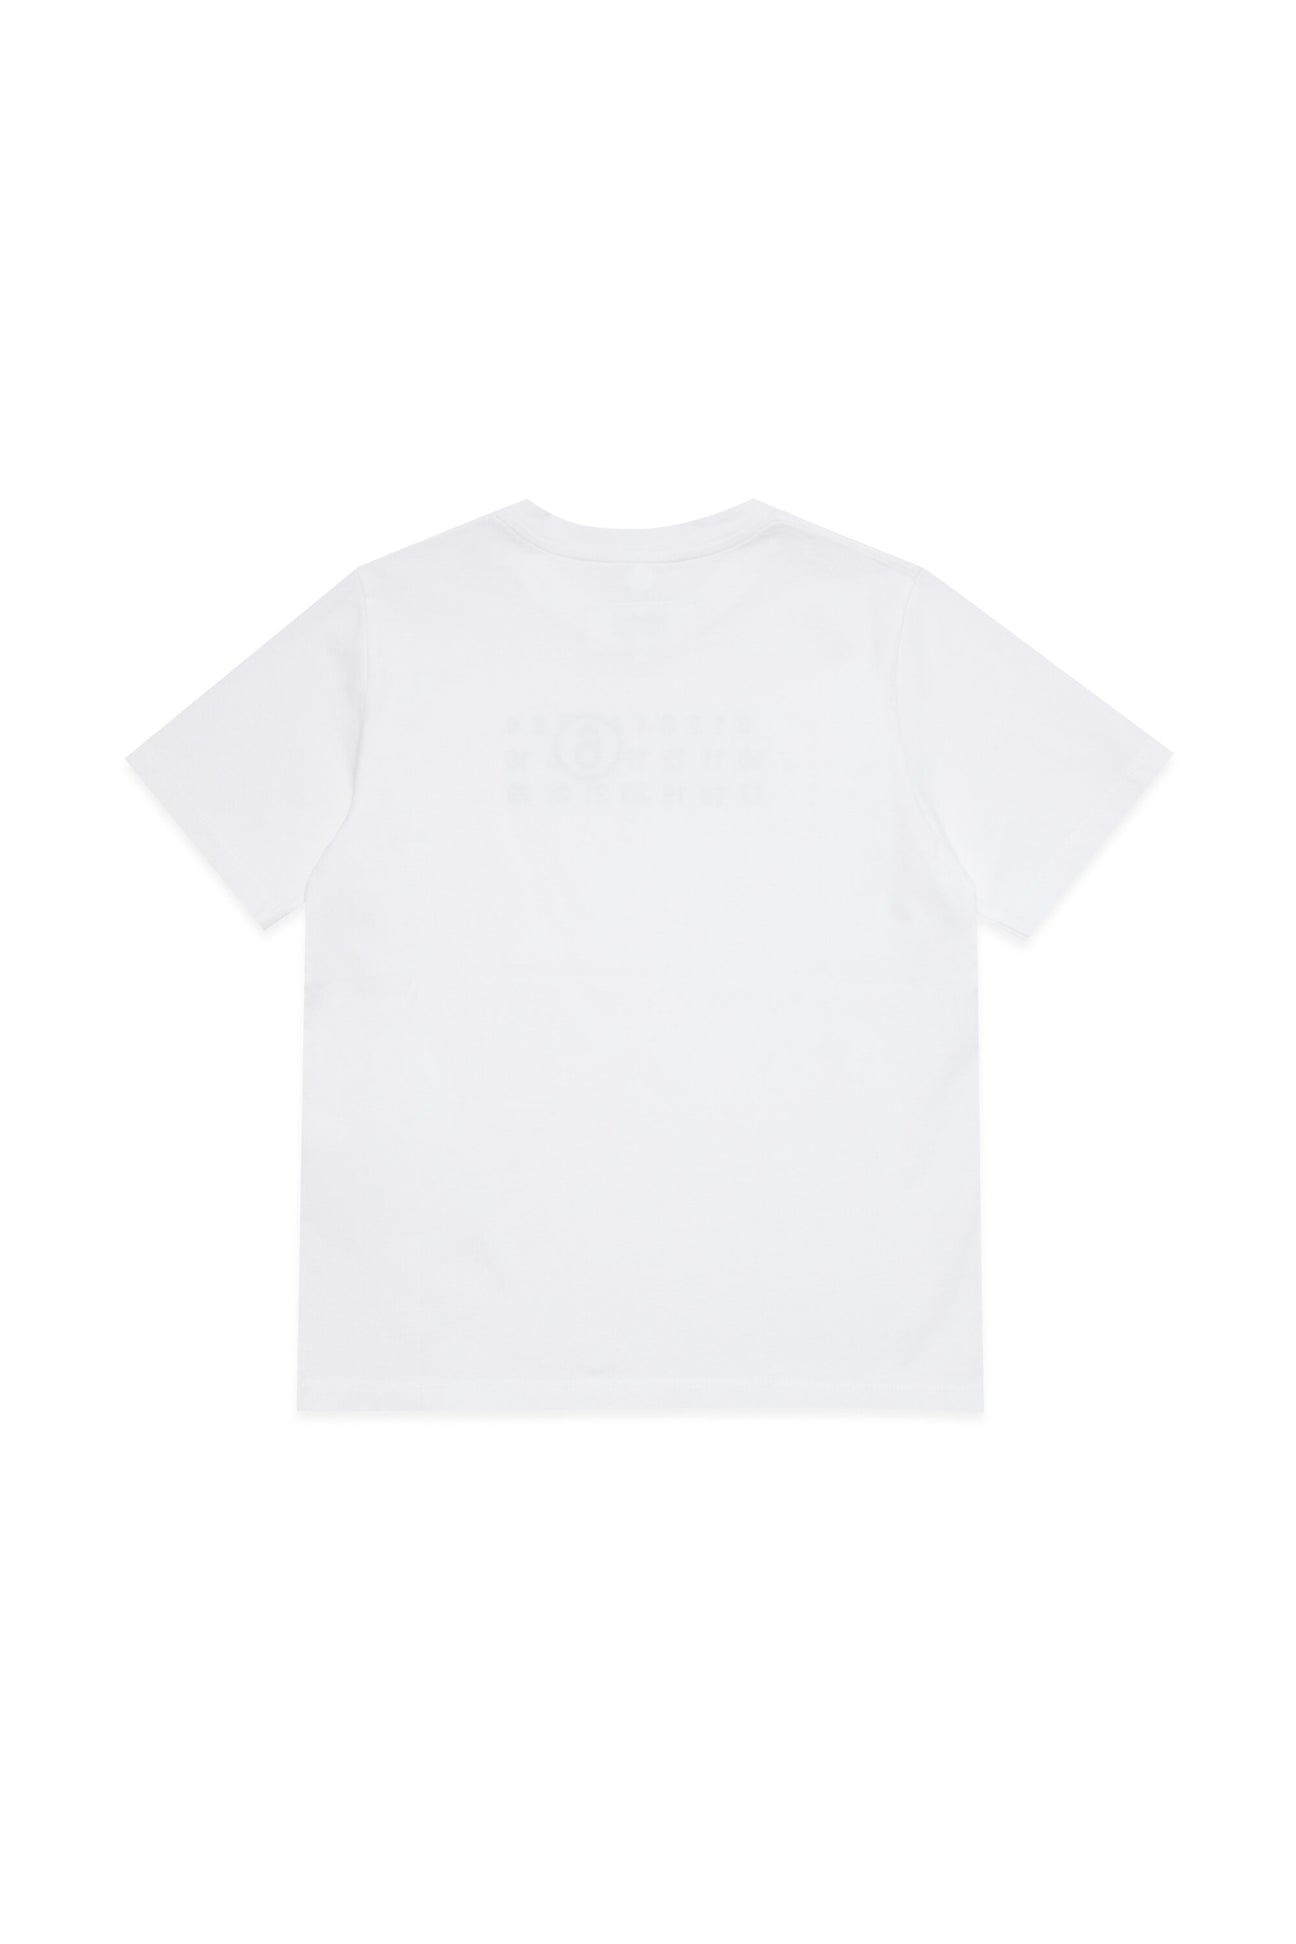 Torn T-shirt branded with numeric logo Torn T-shirt branded with numeric logo